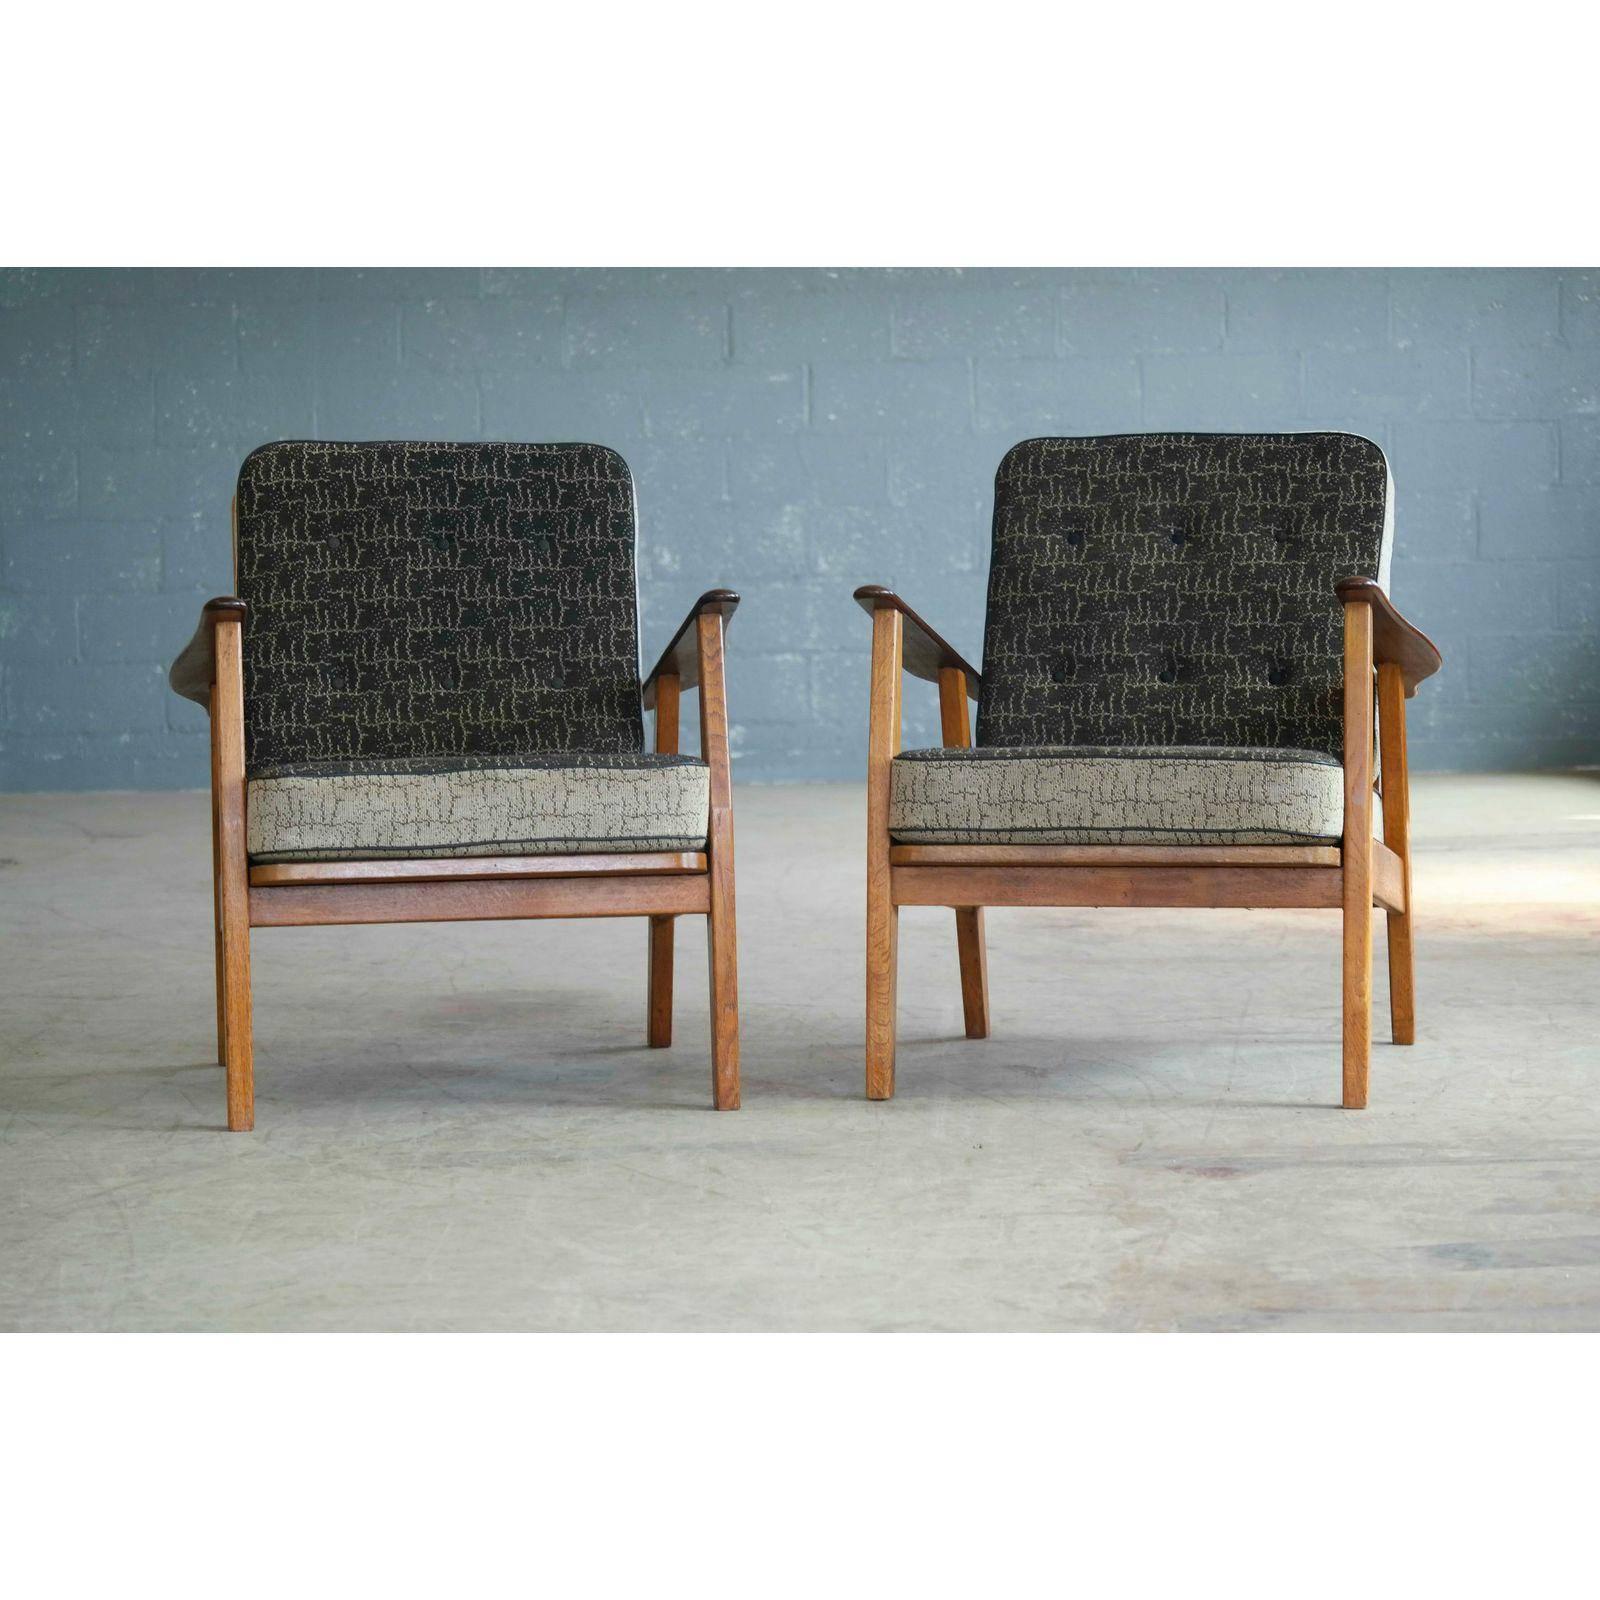 Very elegant high quality pair of Danish easy chairs from the 1950s in the style of Arne Vodder and Hans Wegner's Cigar chair. Solid oak bases with armrests in solid teak and a very nice wood grain and with the original spring loaded cushions.